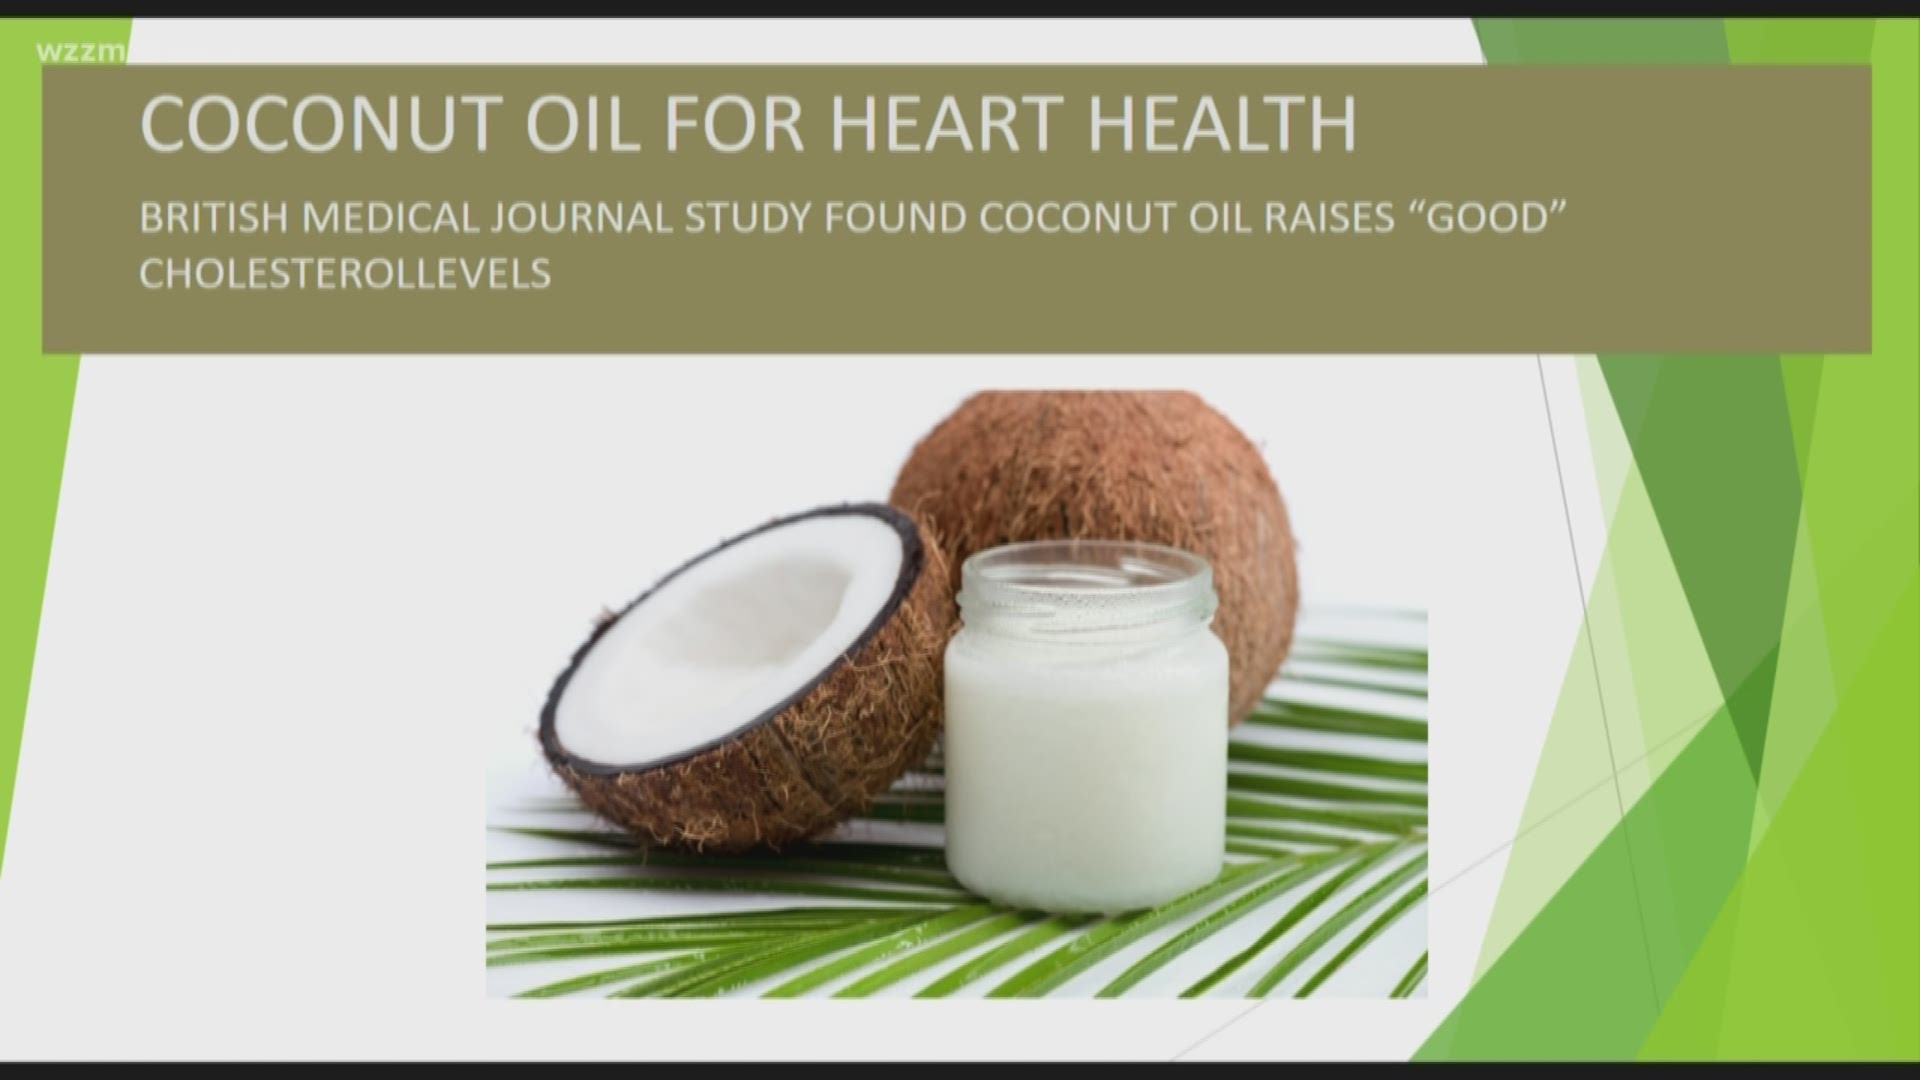 The truth about coconut oil